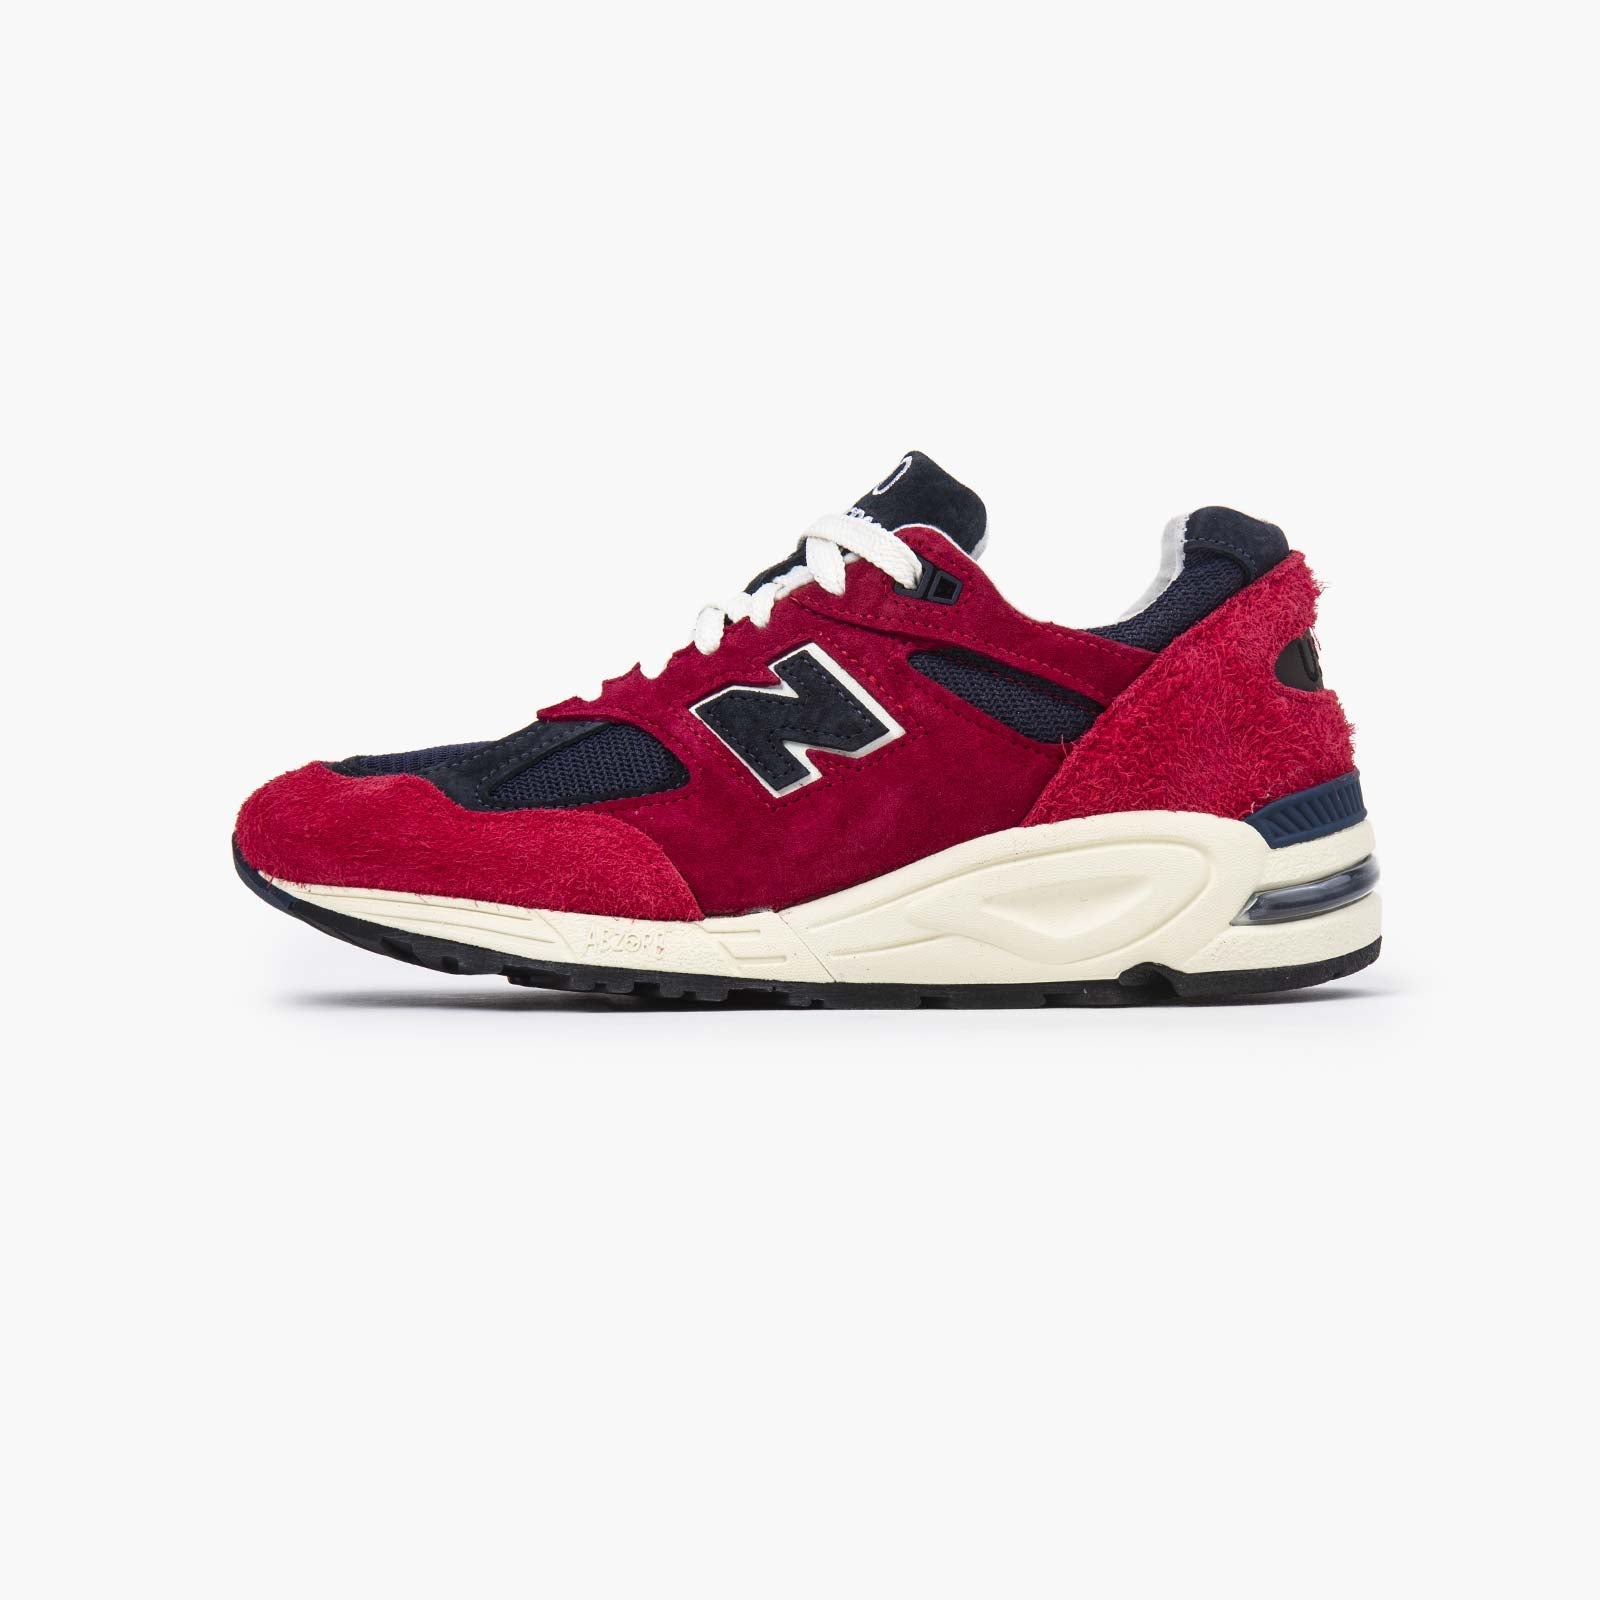 New Balance 990v2 made in USA "Scarlet"-SUEDE Store